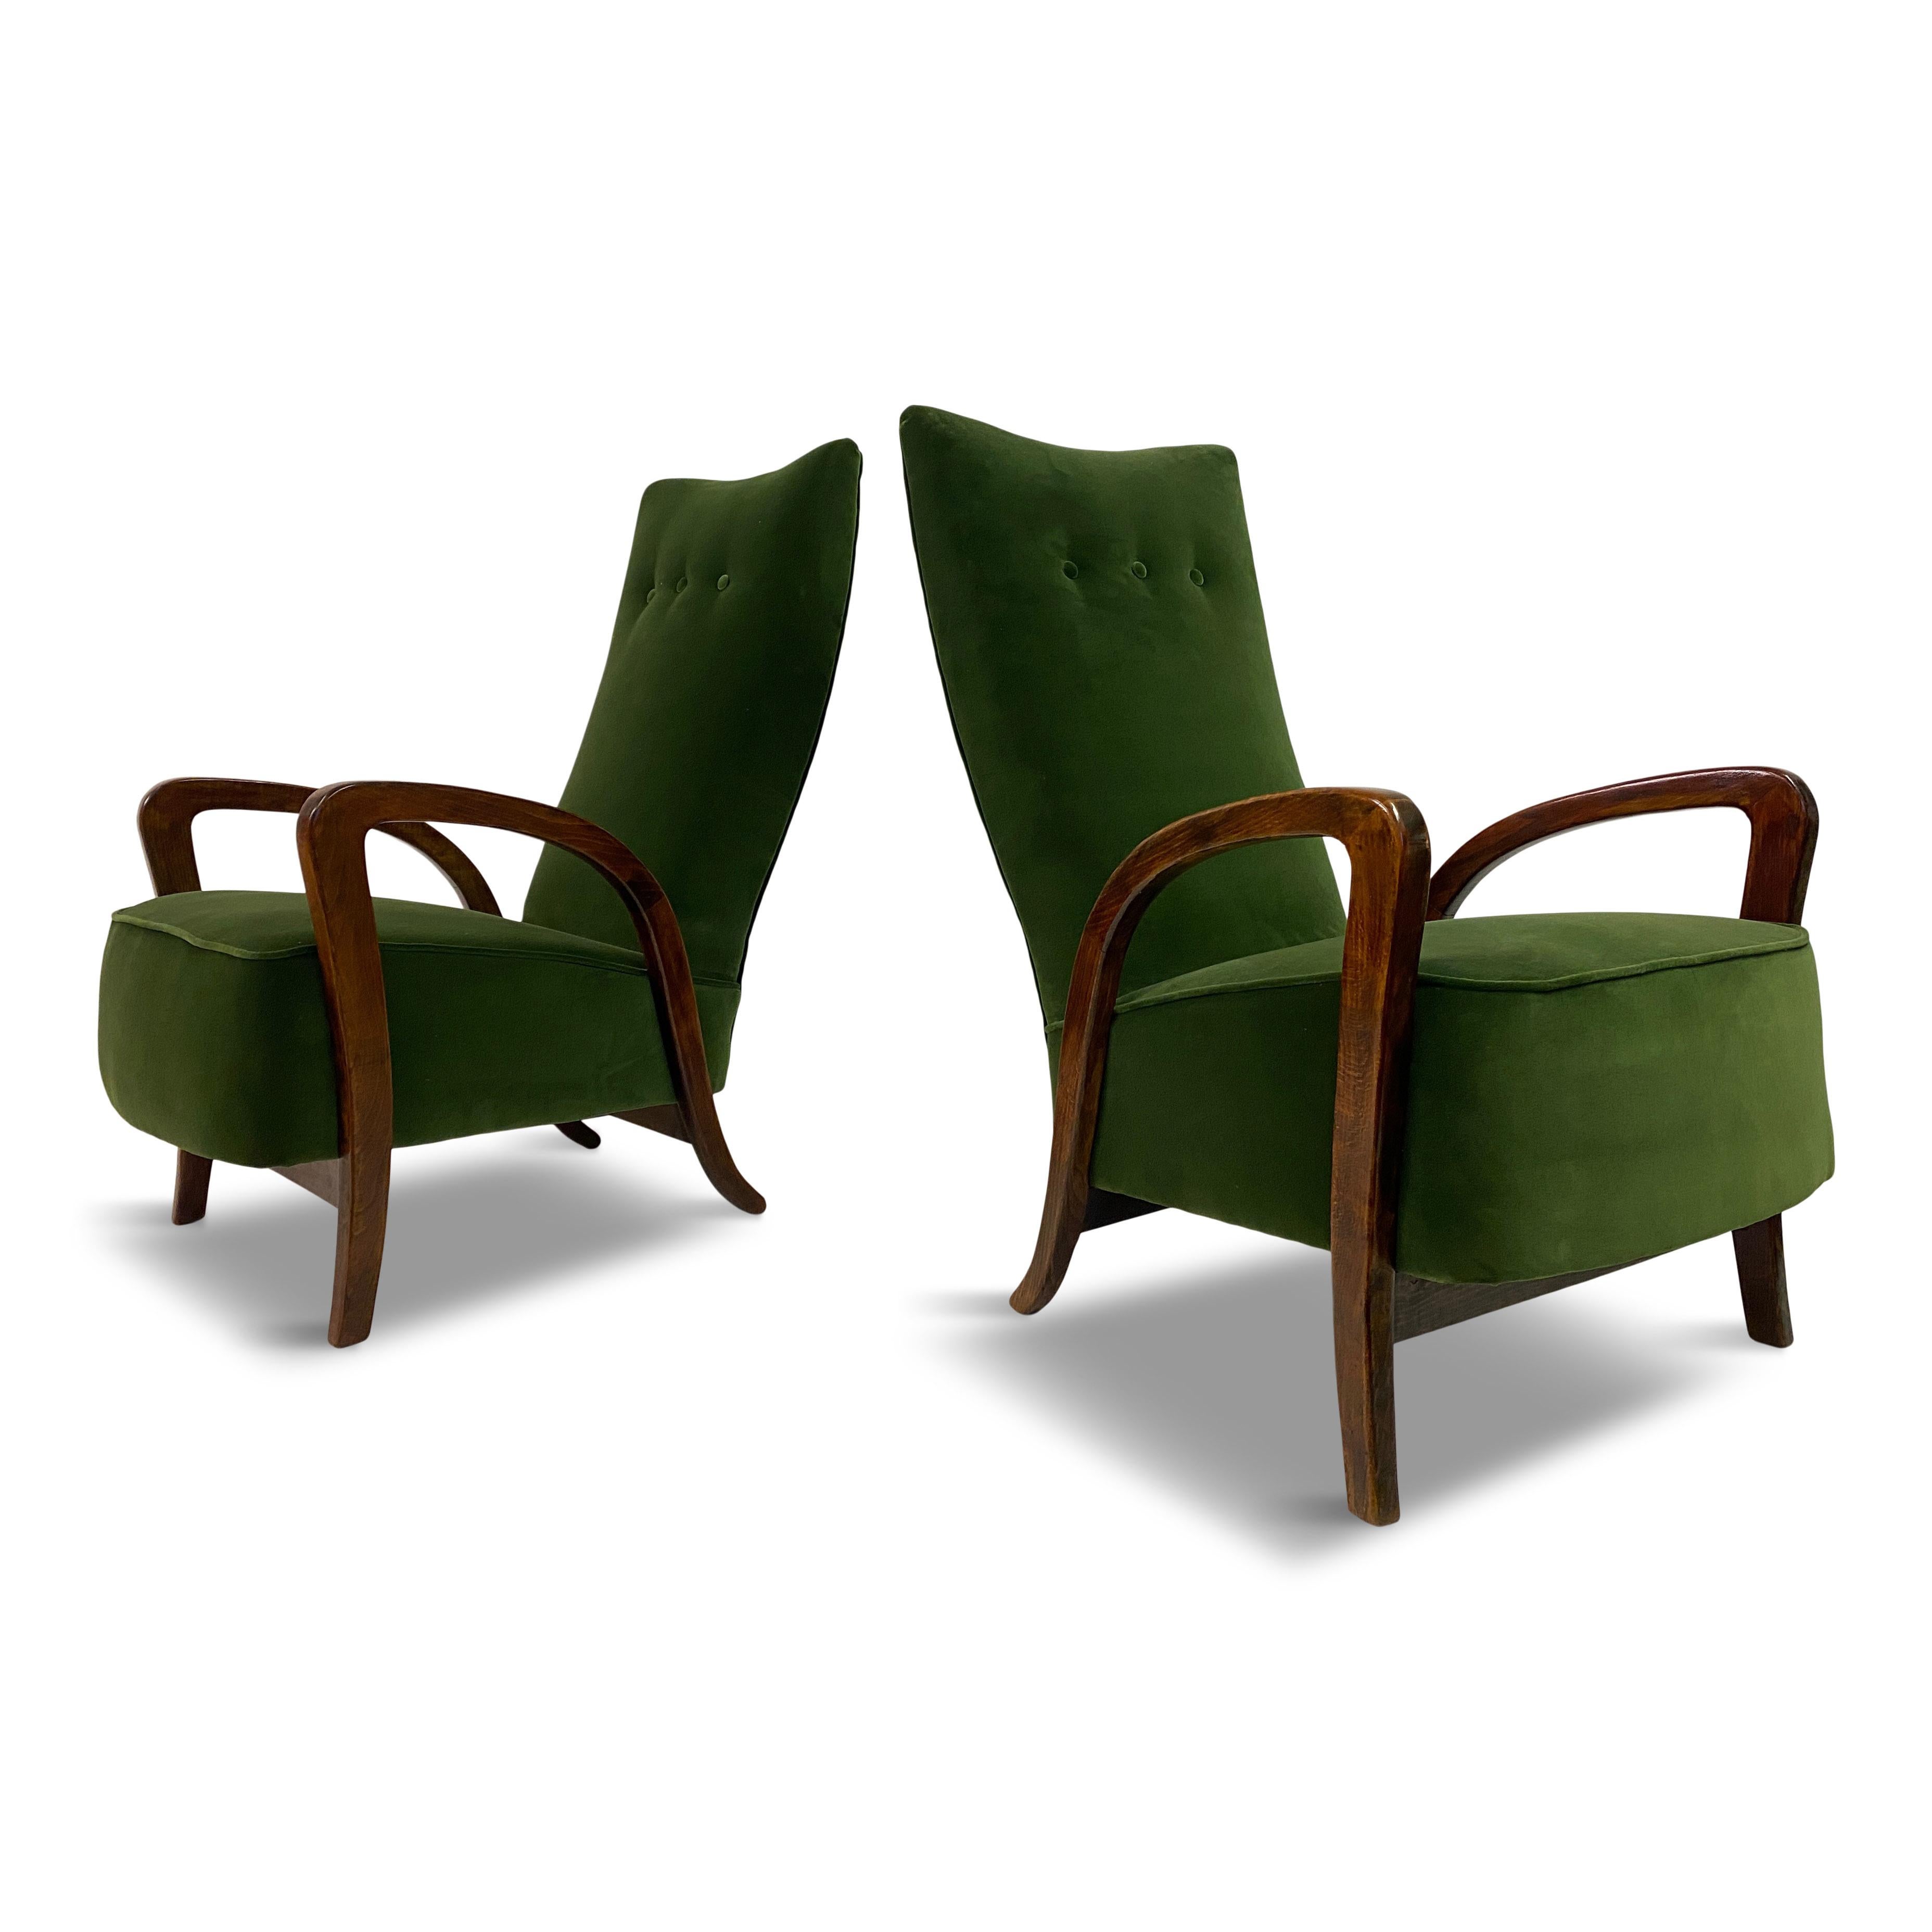 Pair of armchairs

Sculptured arms and legs

New green Desogners Guild velvet upholstery

Seat height 42cm

1950s Italian